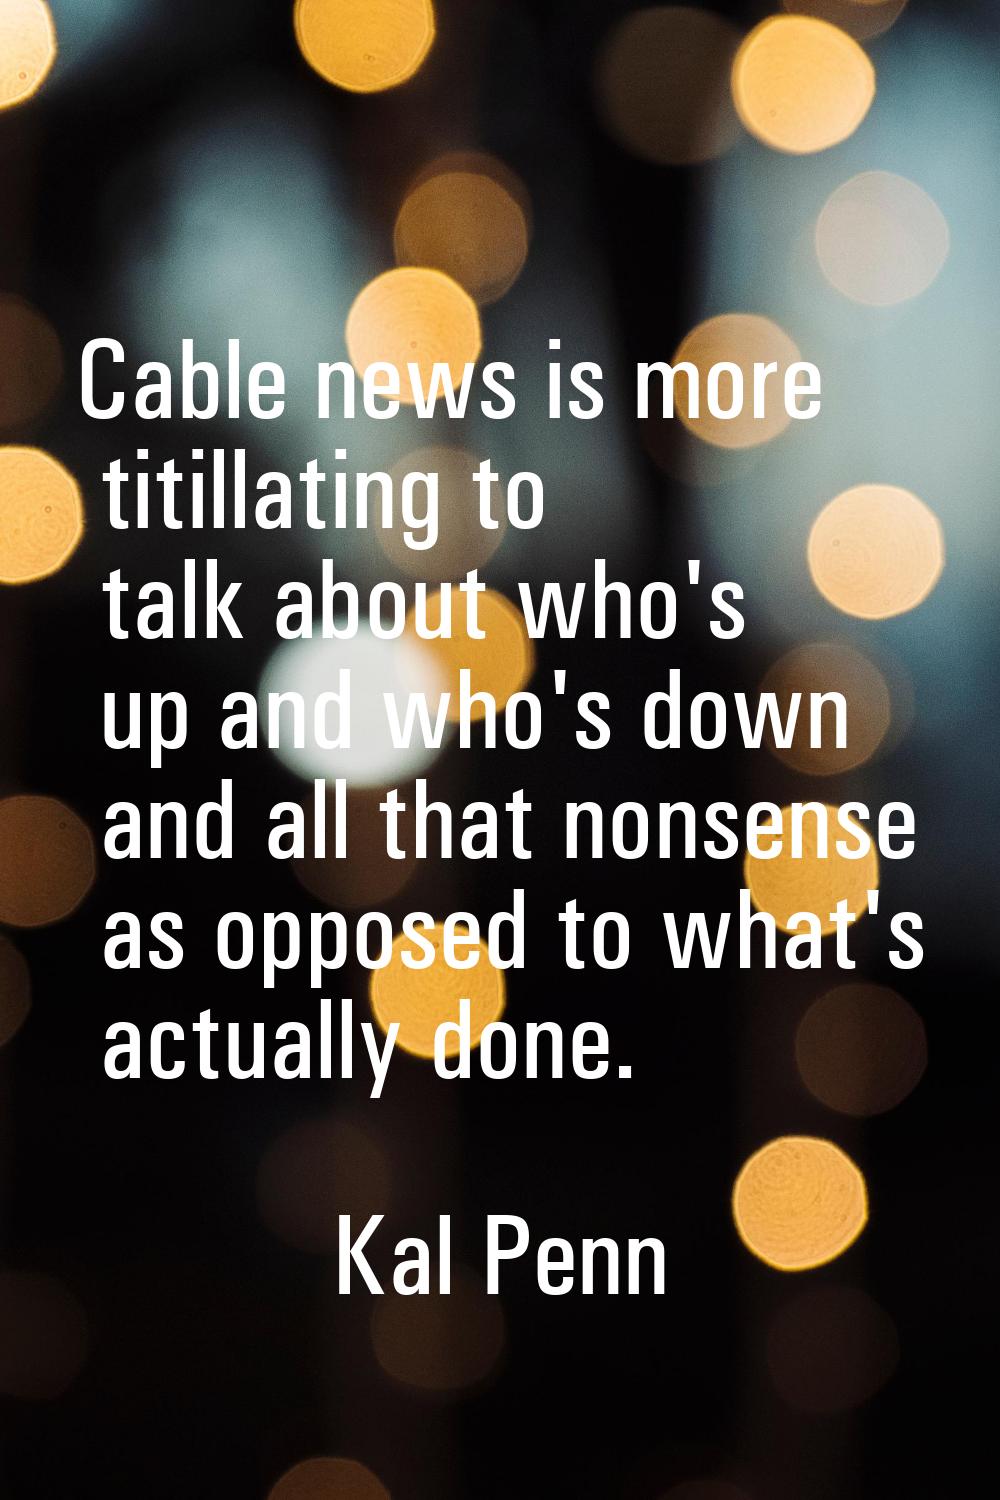 Cable news is more titillating to talk about who's up and who's down and all that nonsense as oppos